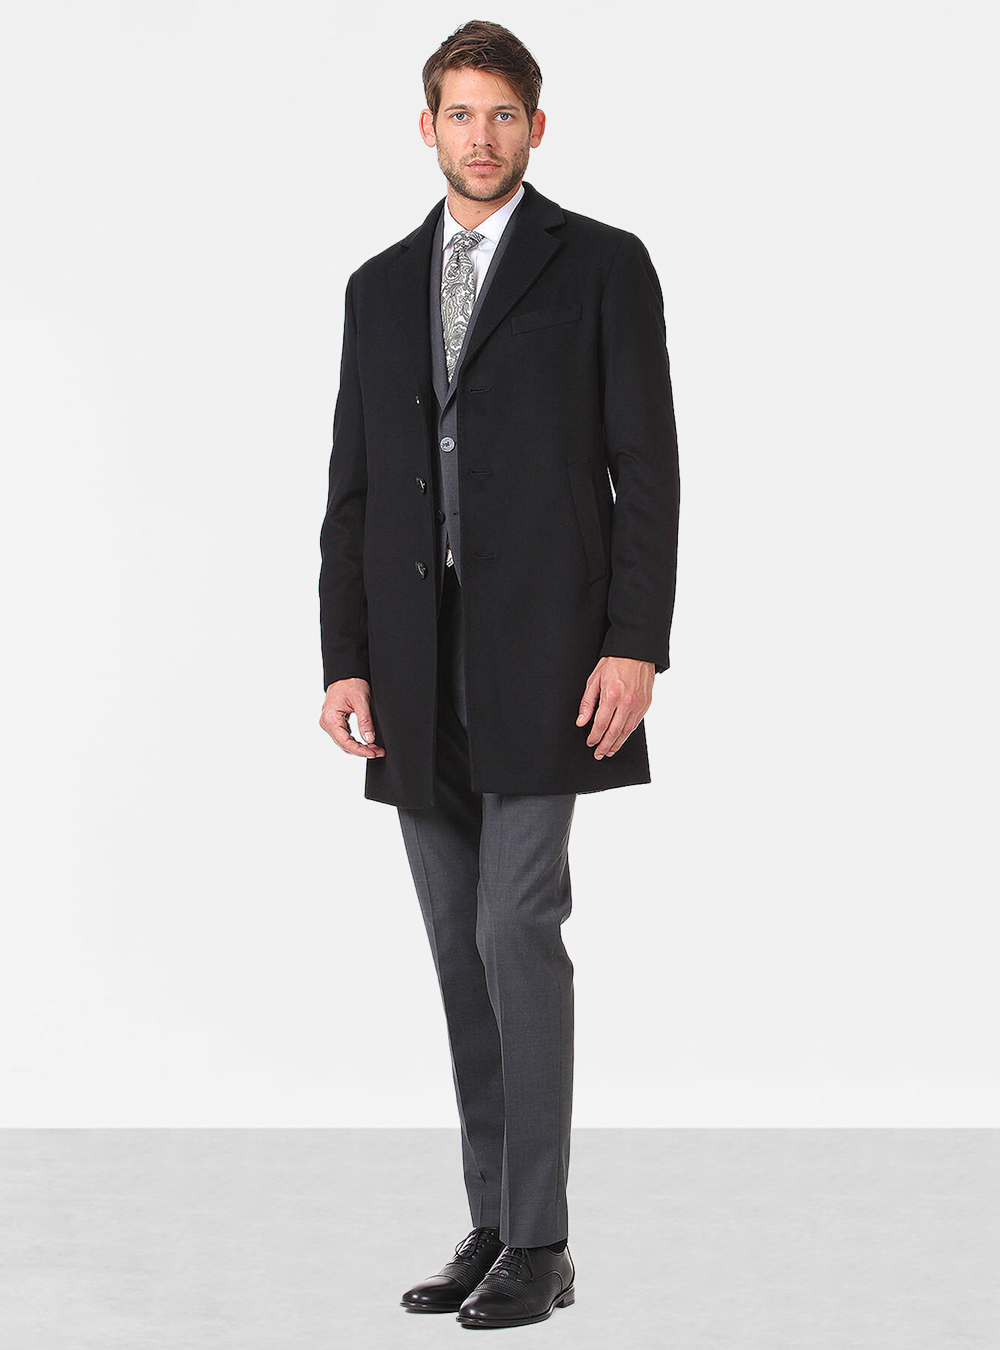 black overcoat with a charcoal grey suit